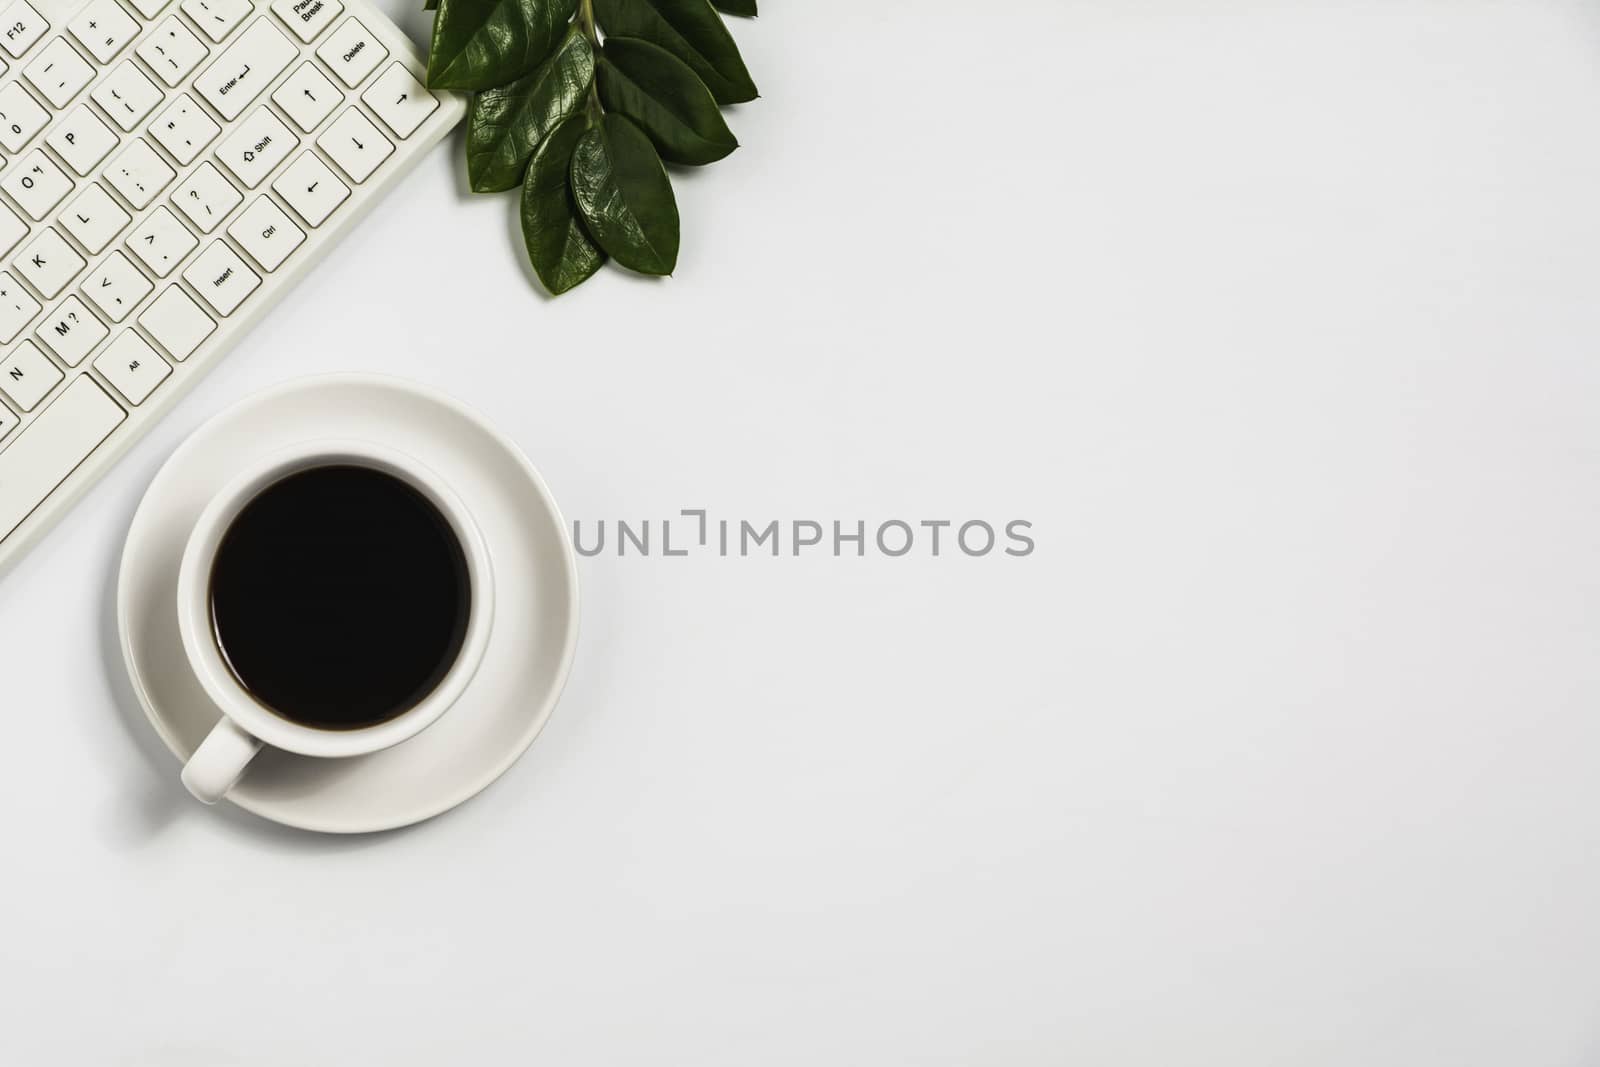 A coffee cup on white office desk with copy space. Business and workspace concept.